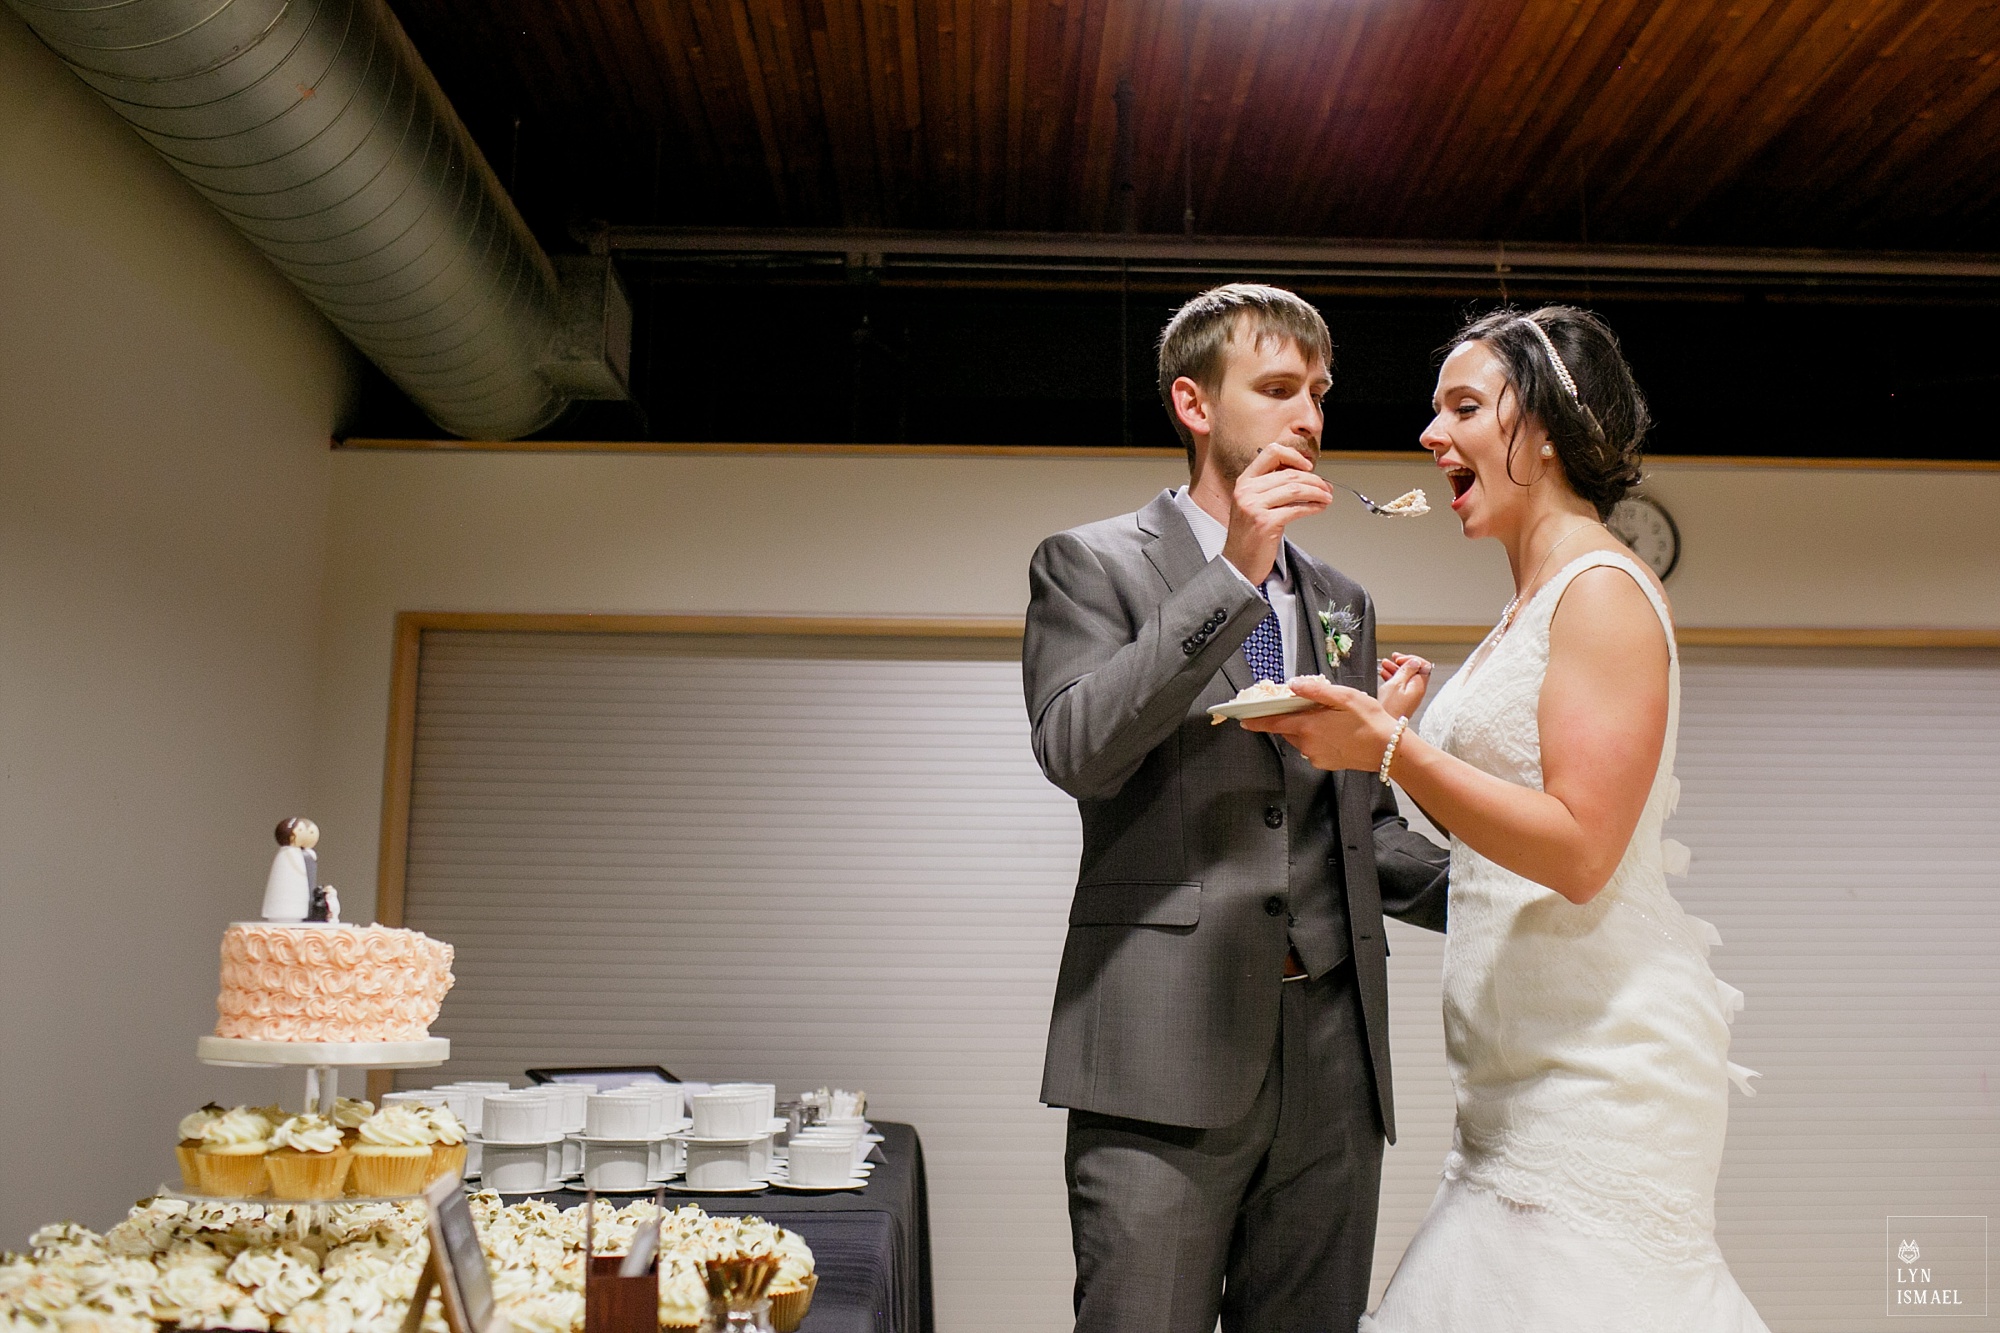 Bride and groom feed each other cake at their wedding reception at THEMUSEUM in Kitchener.